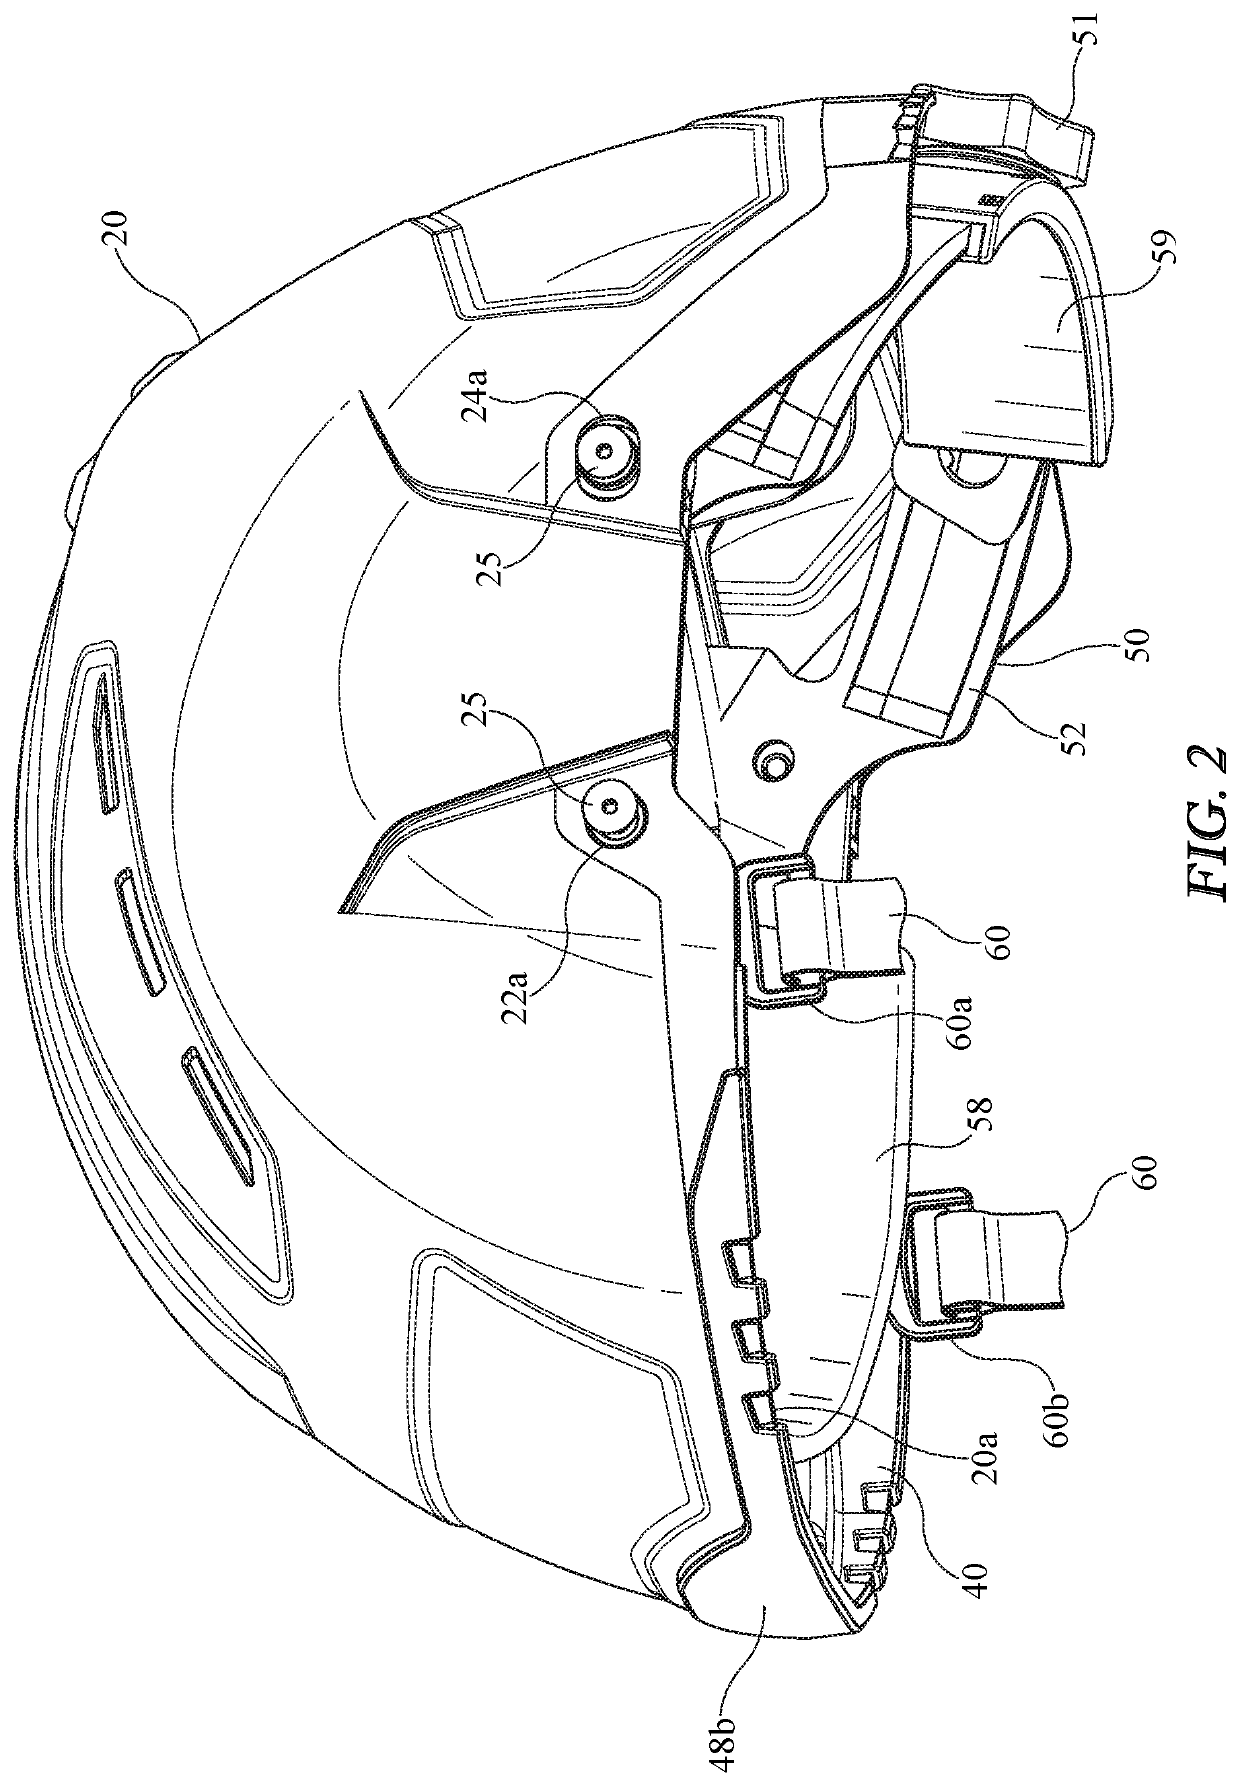 Protective helmet with attachment ring